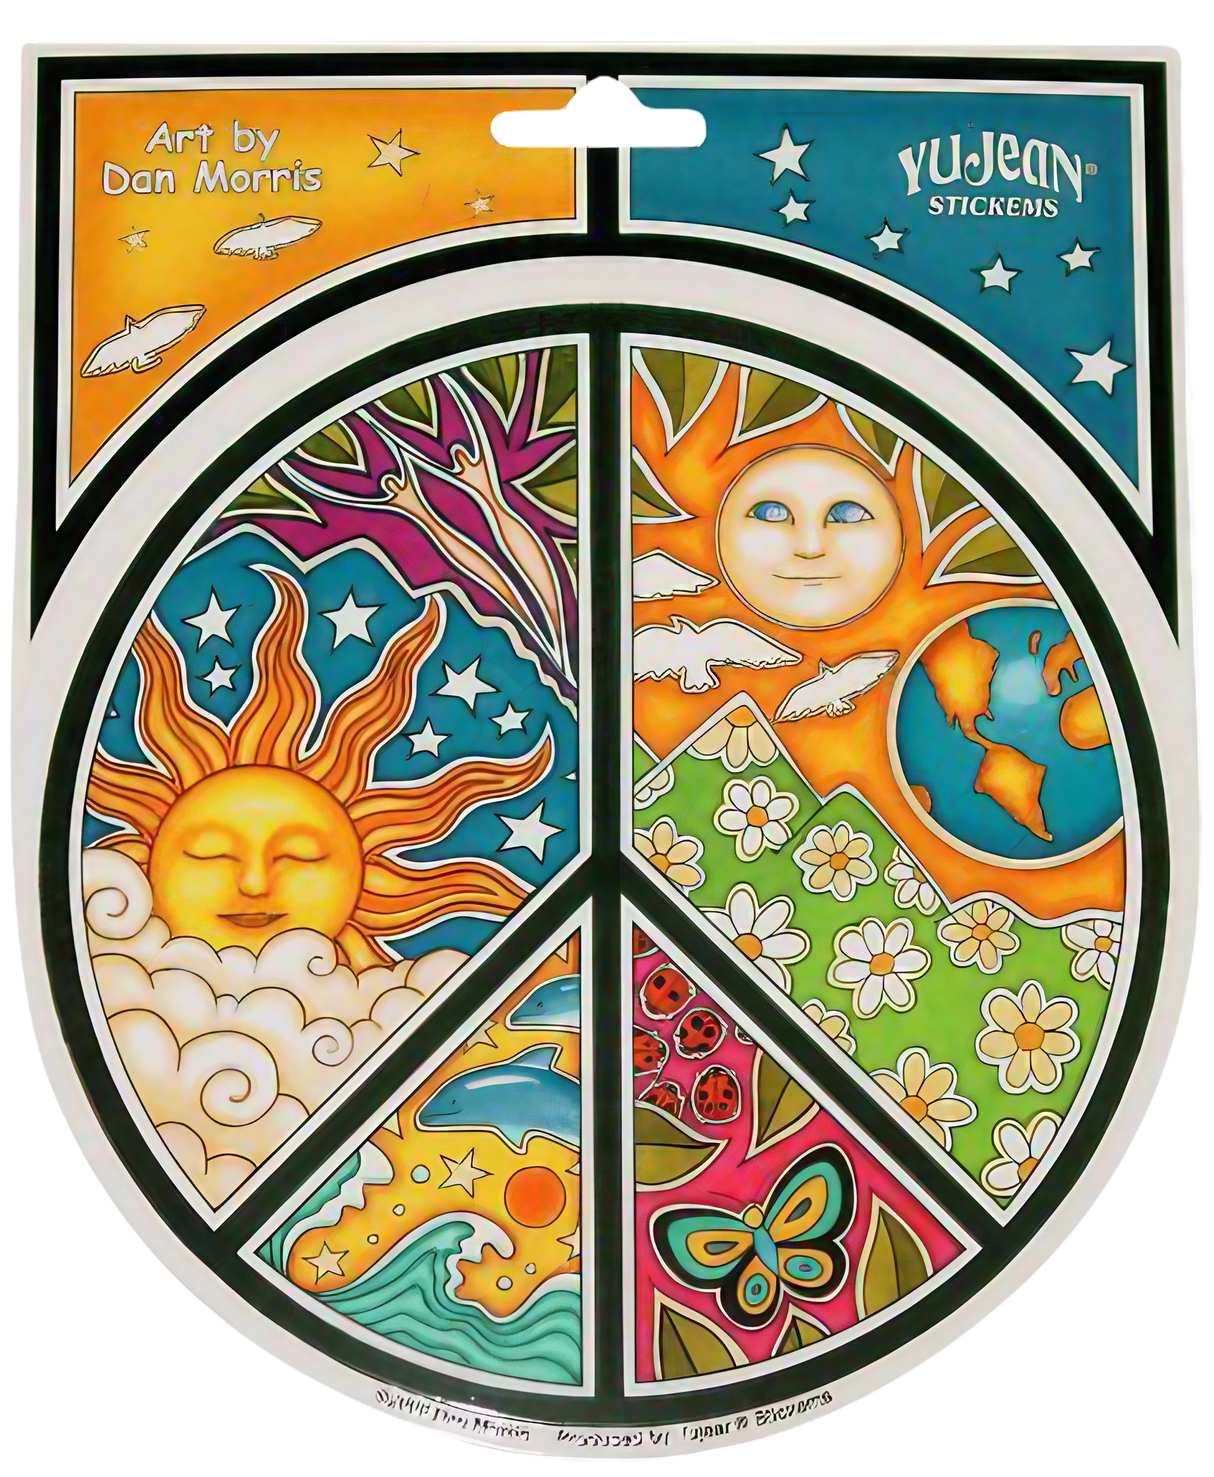 Dan Morris Peace Sticker with colorful celestial and nature artwork, perfect for decor